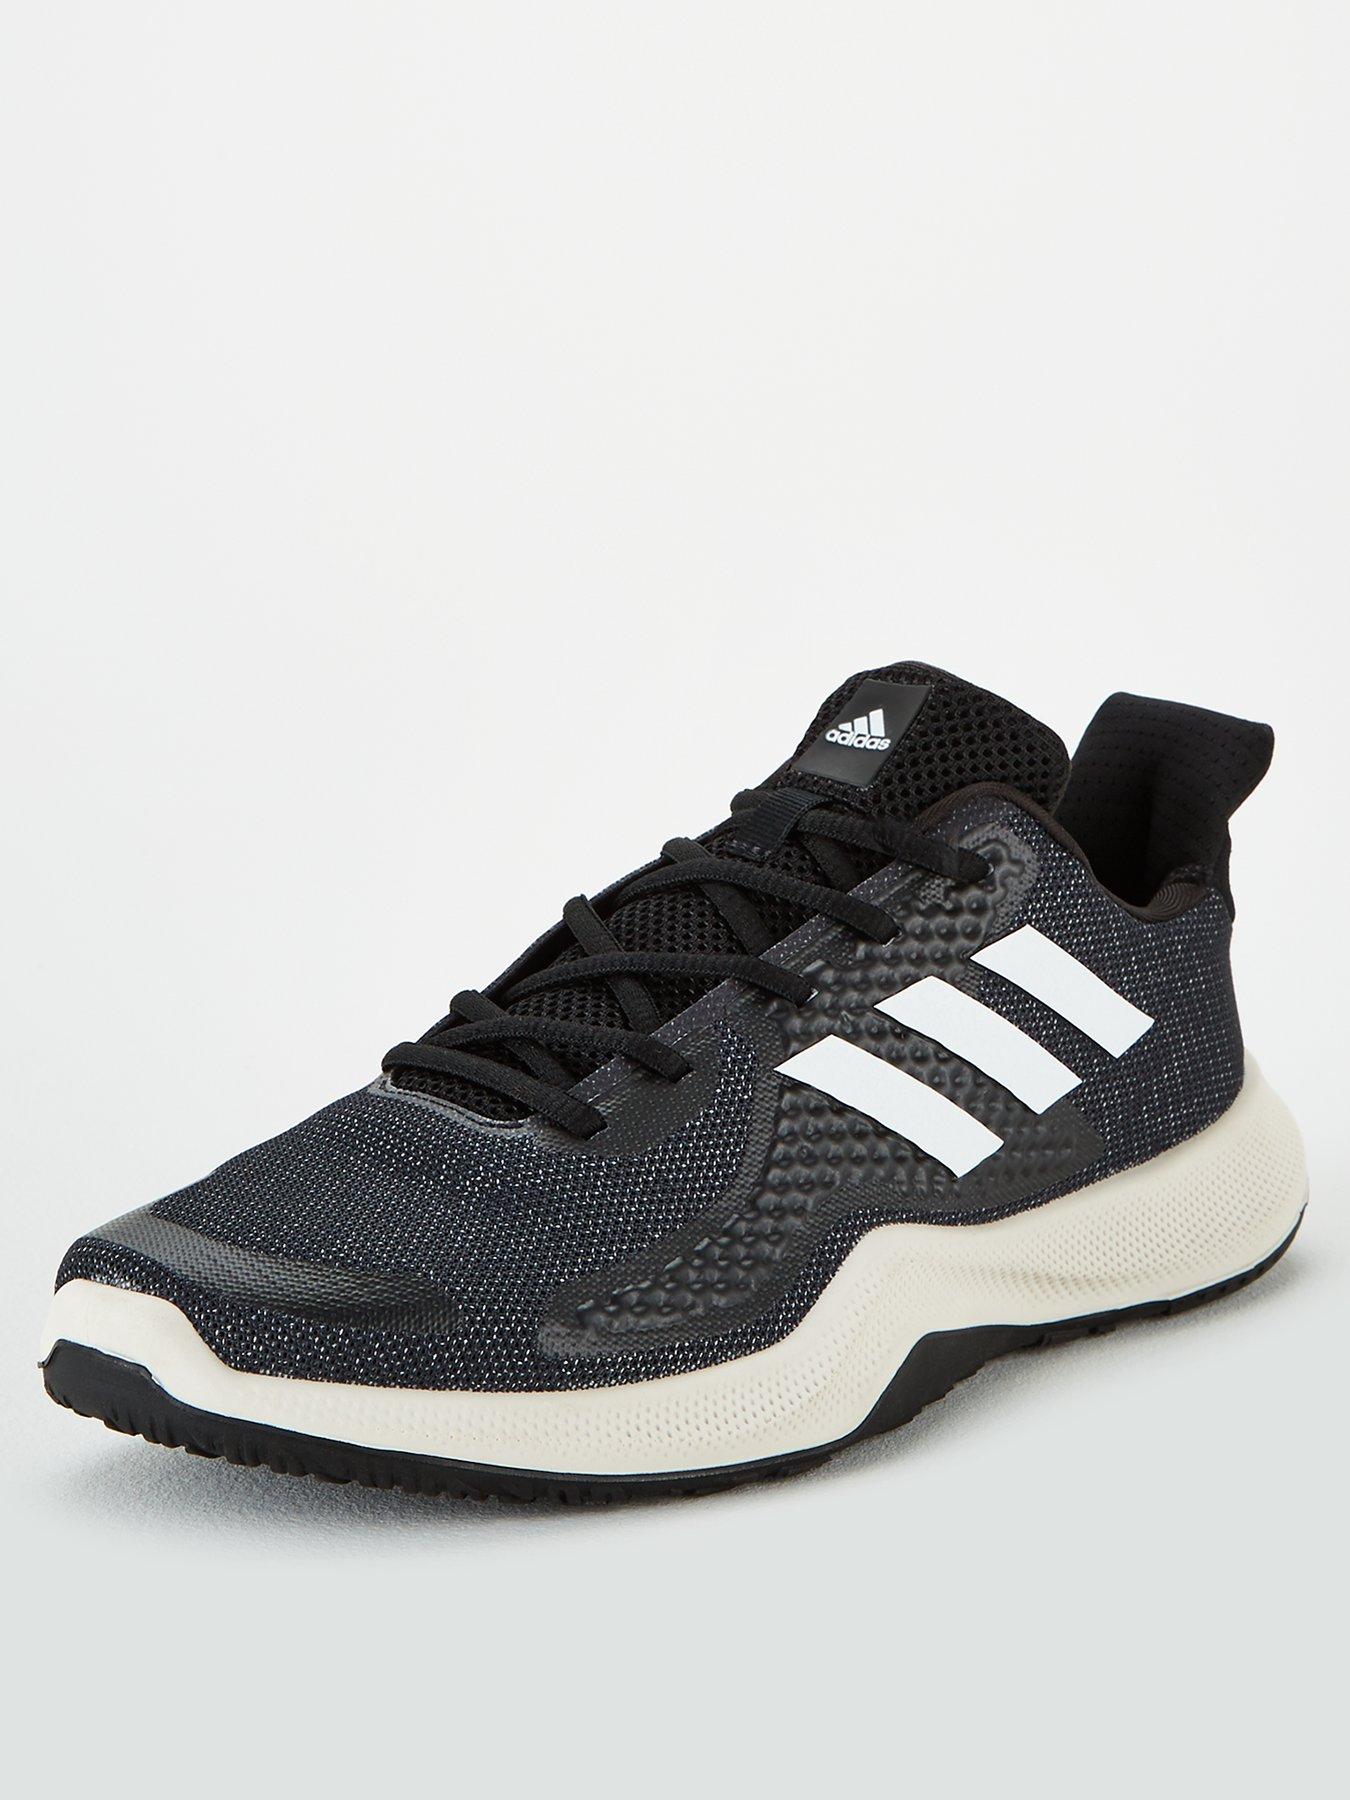 adidas fitbounce trainers womens